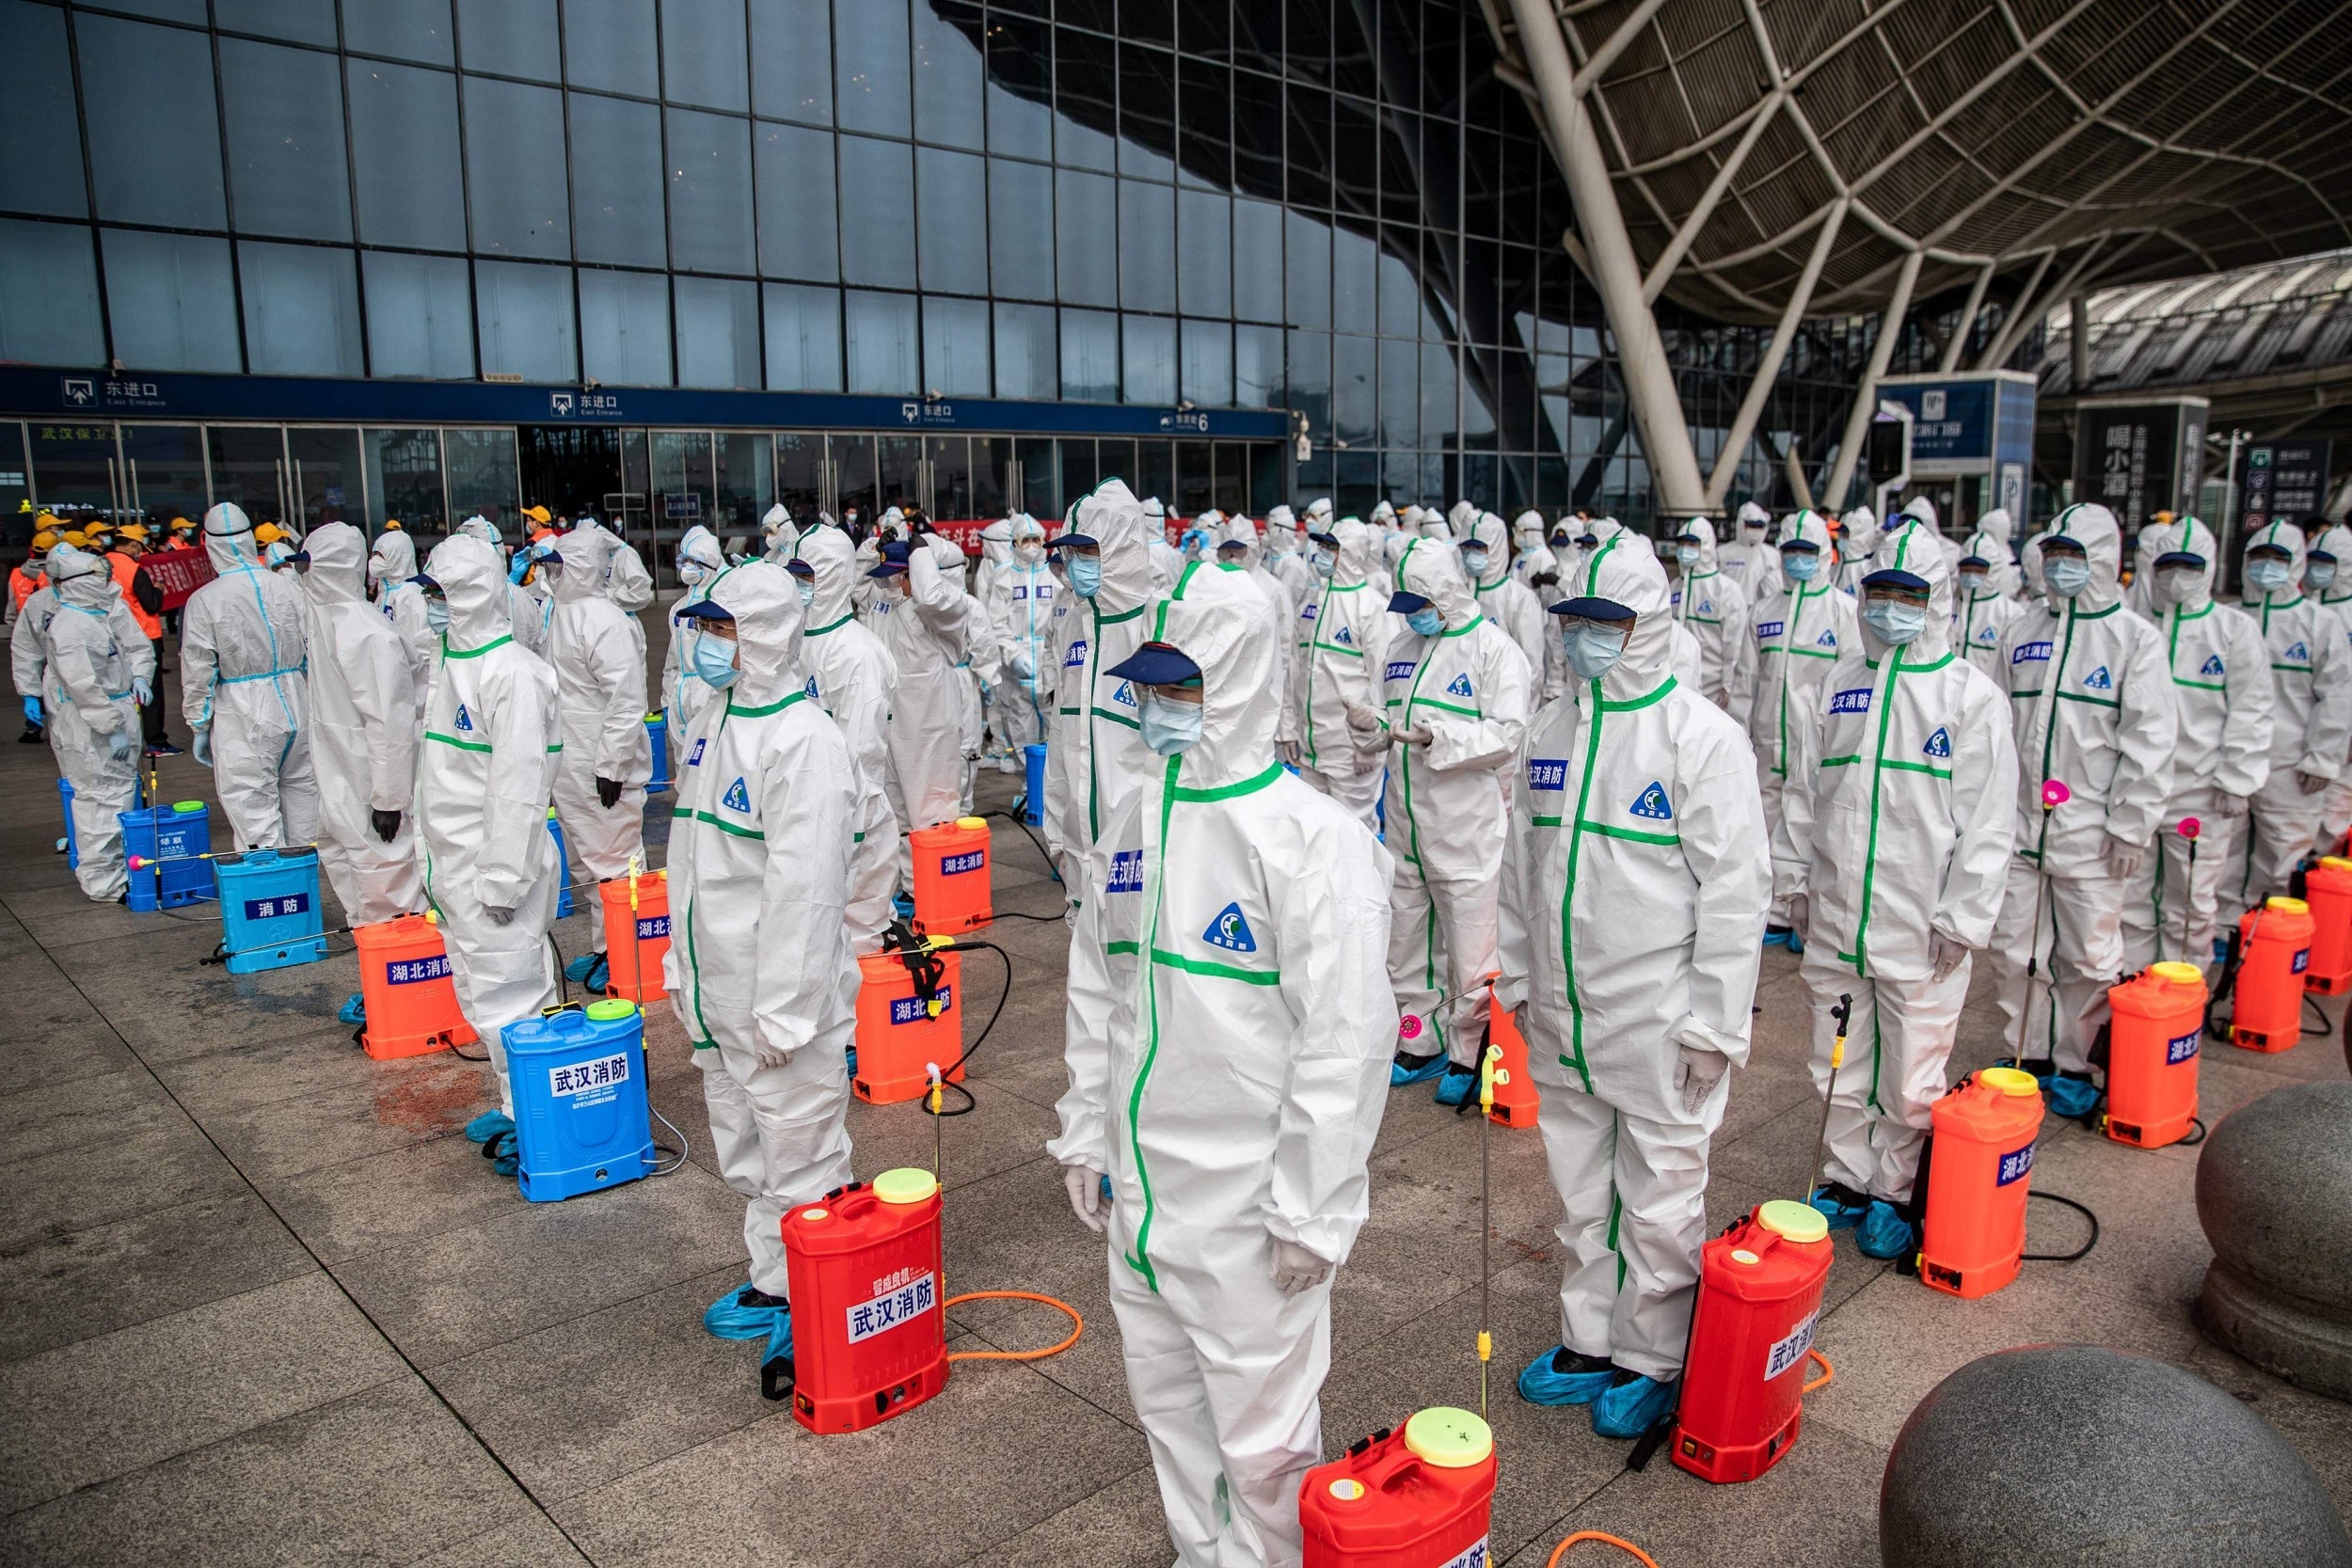 Staff members line up at attention as they prepare to spray disinfectant at Wuhan Railway Station